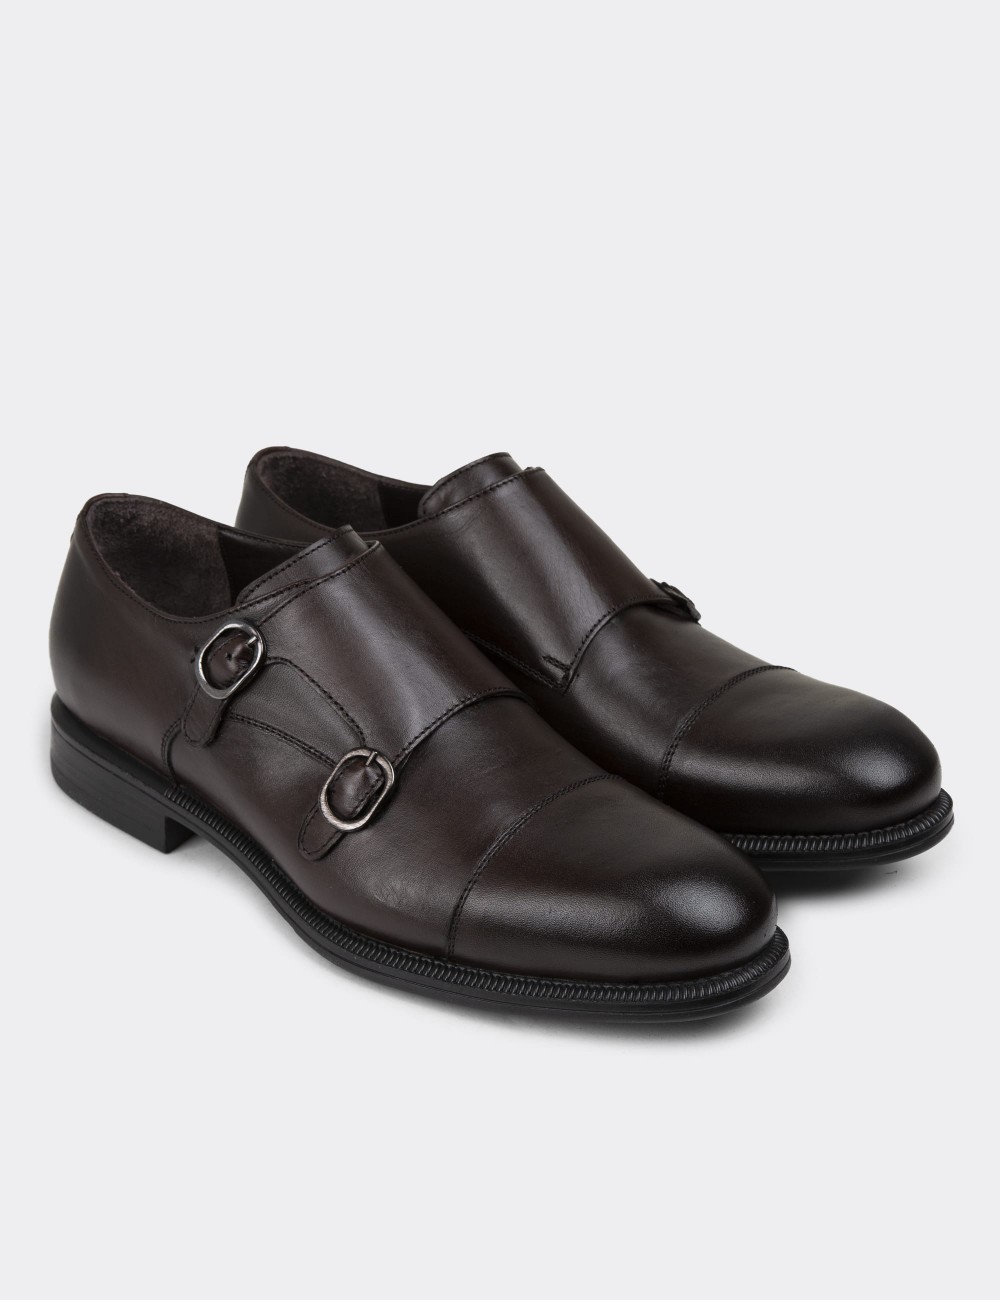 Brown Leather Double Monk-Strap Classic Shoes - 01838MKHVC01